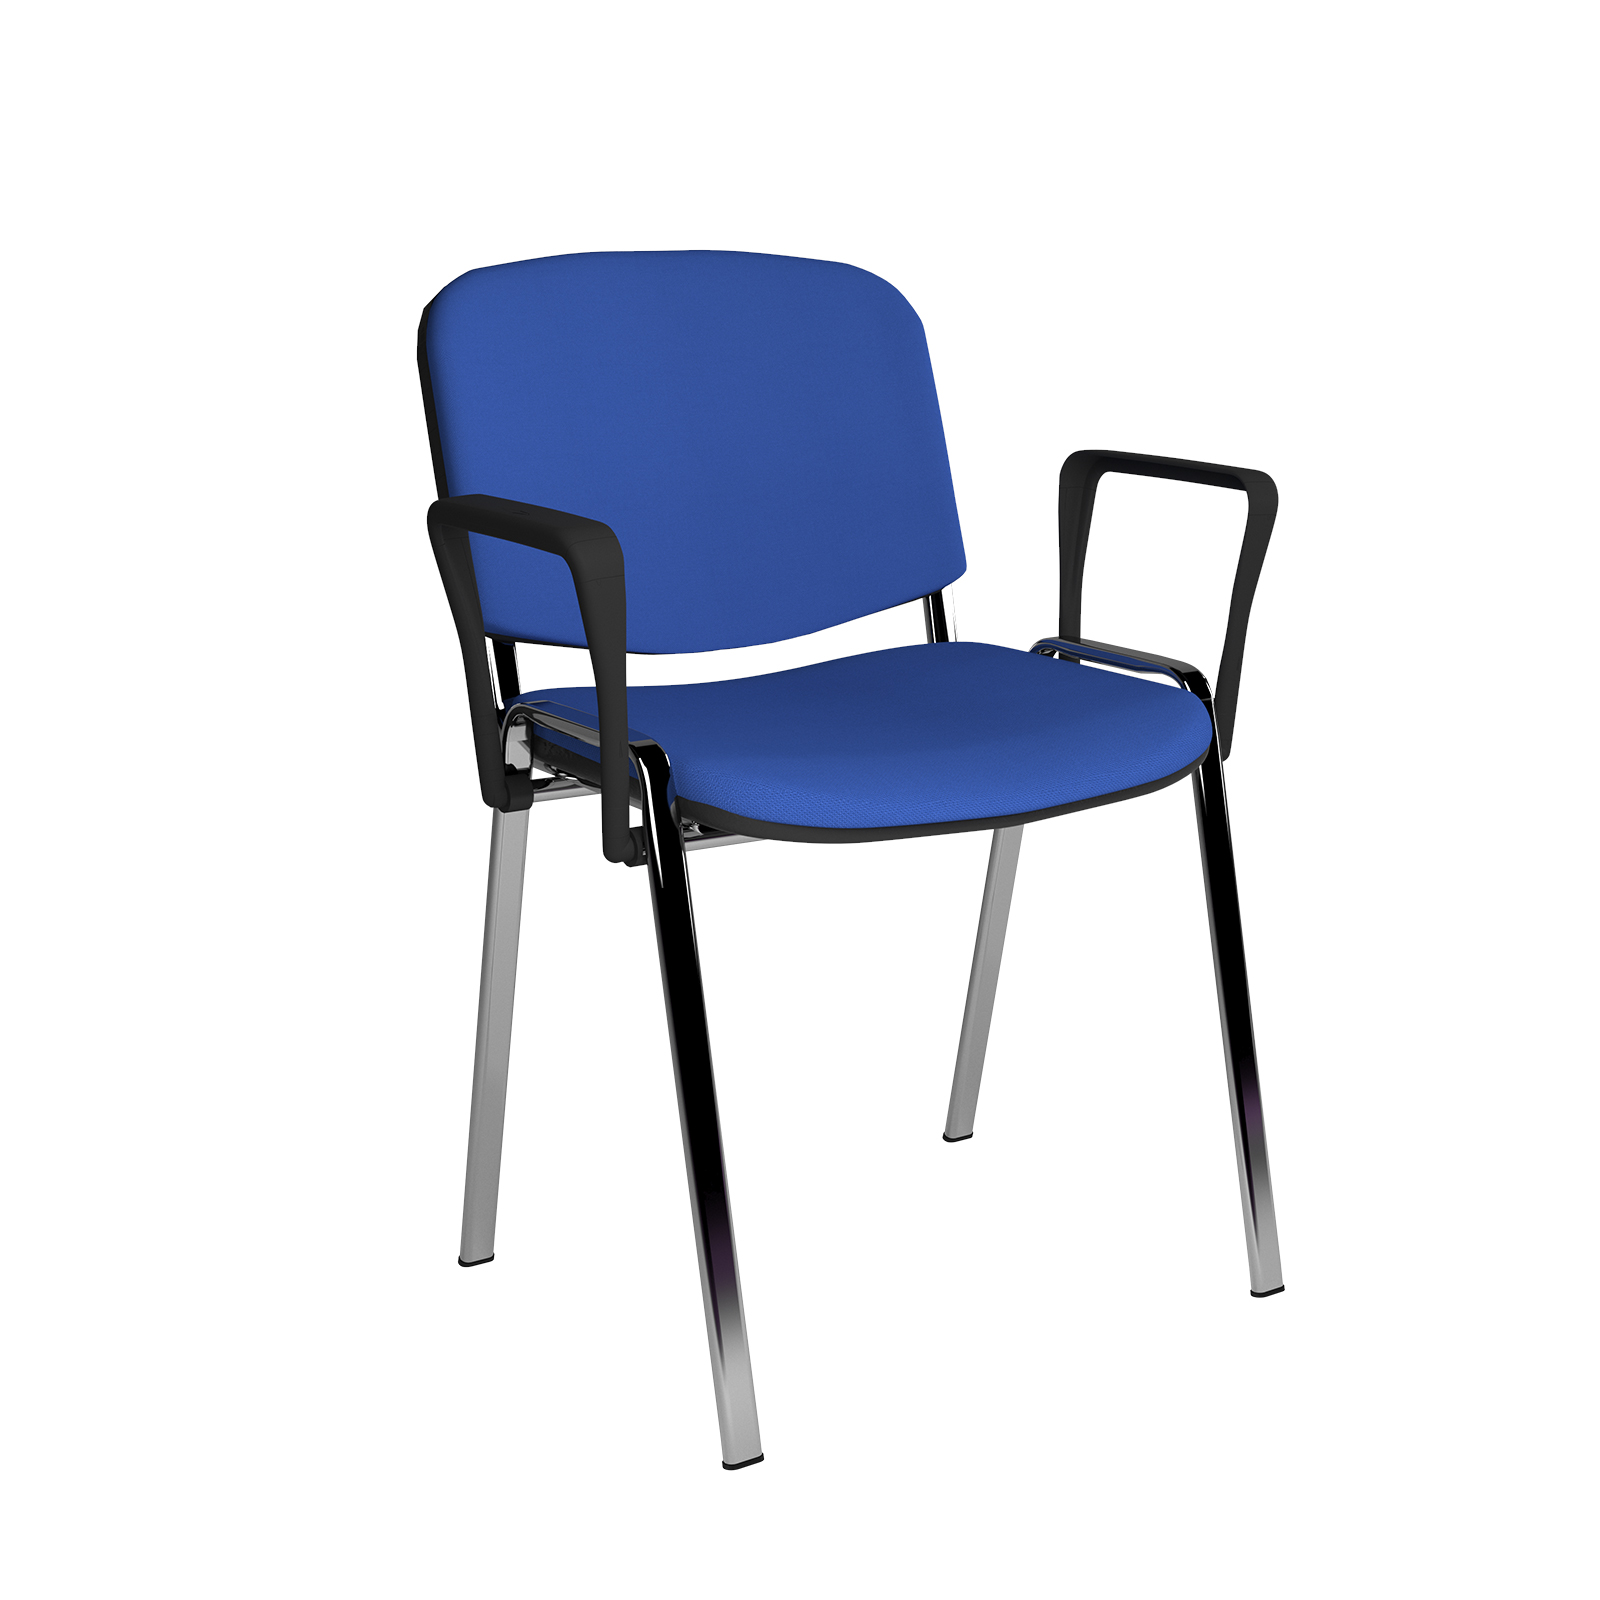 ISO Meeting Room Stackable Armchair with Chrome Frame